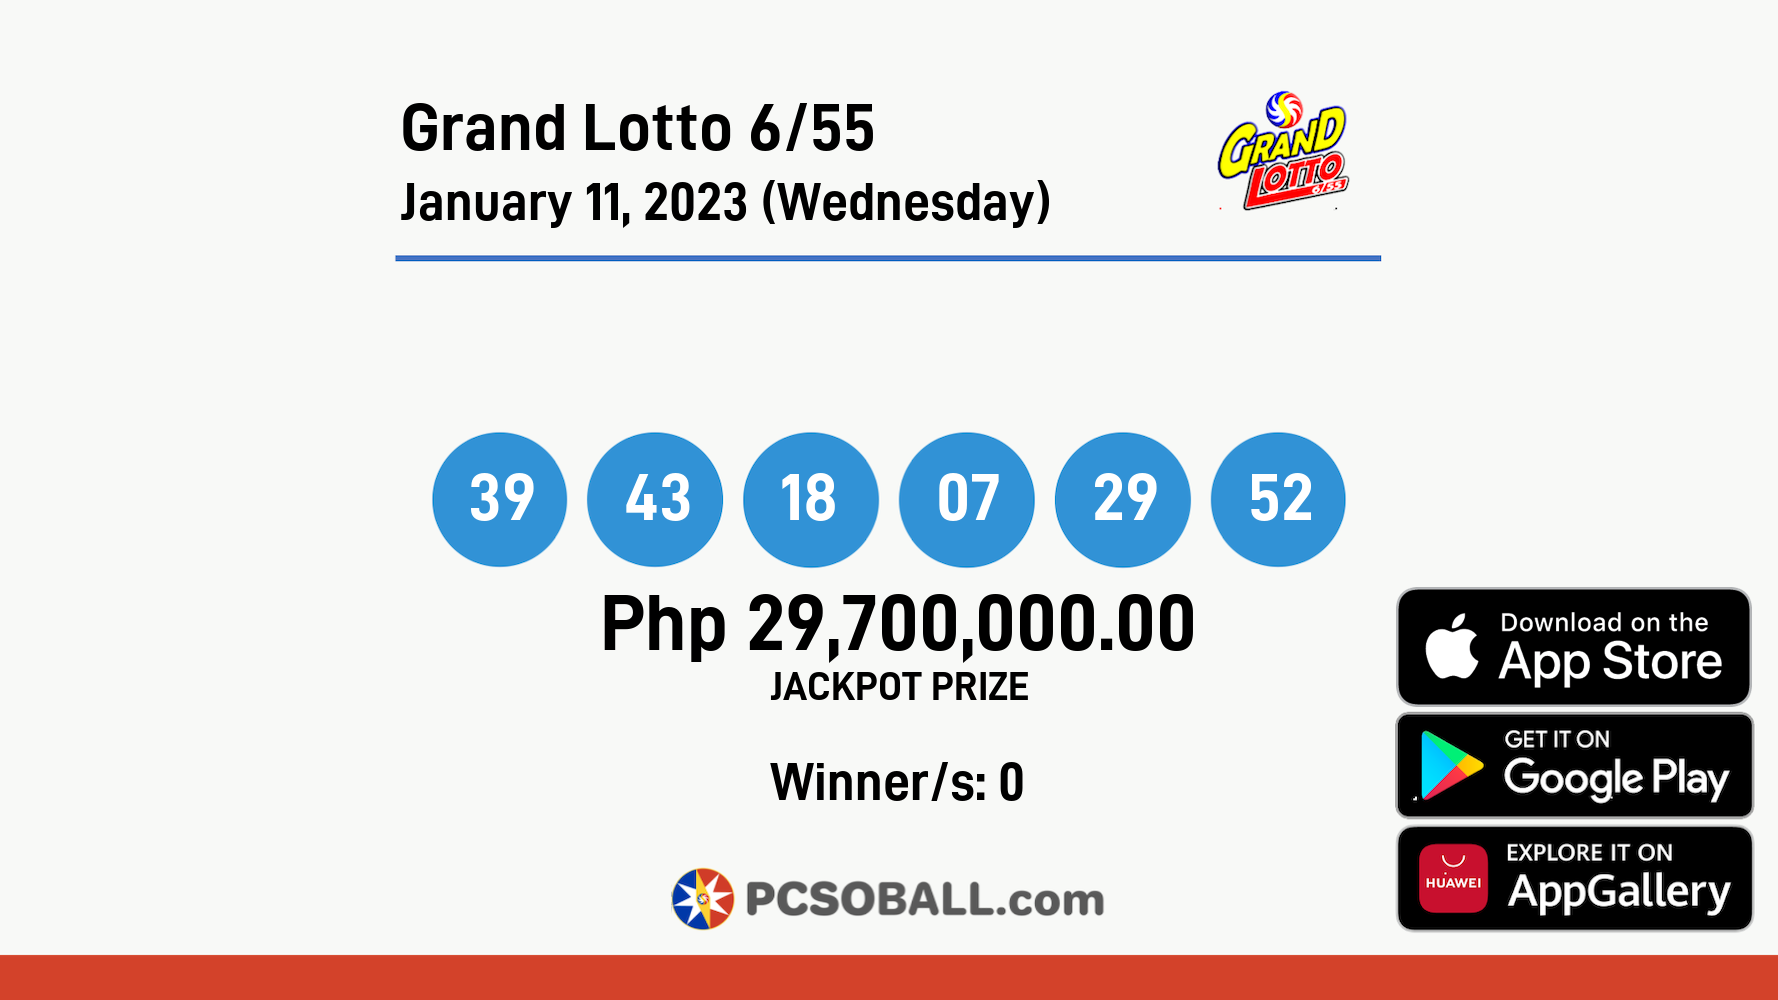 Grand Lotto 6/55 January 11, 2023 (Wednesday) Result